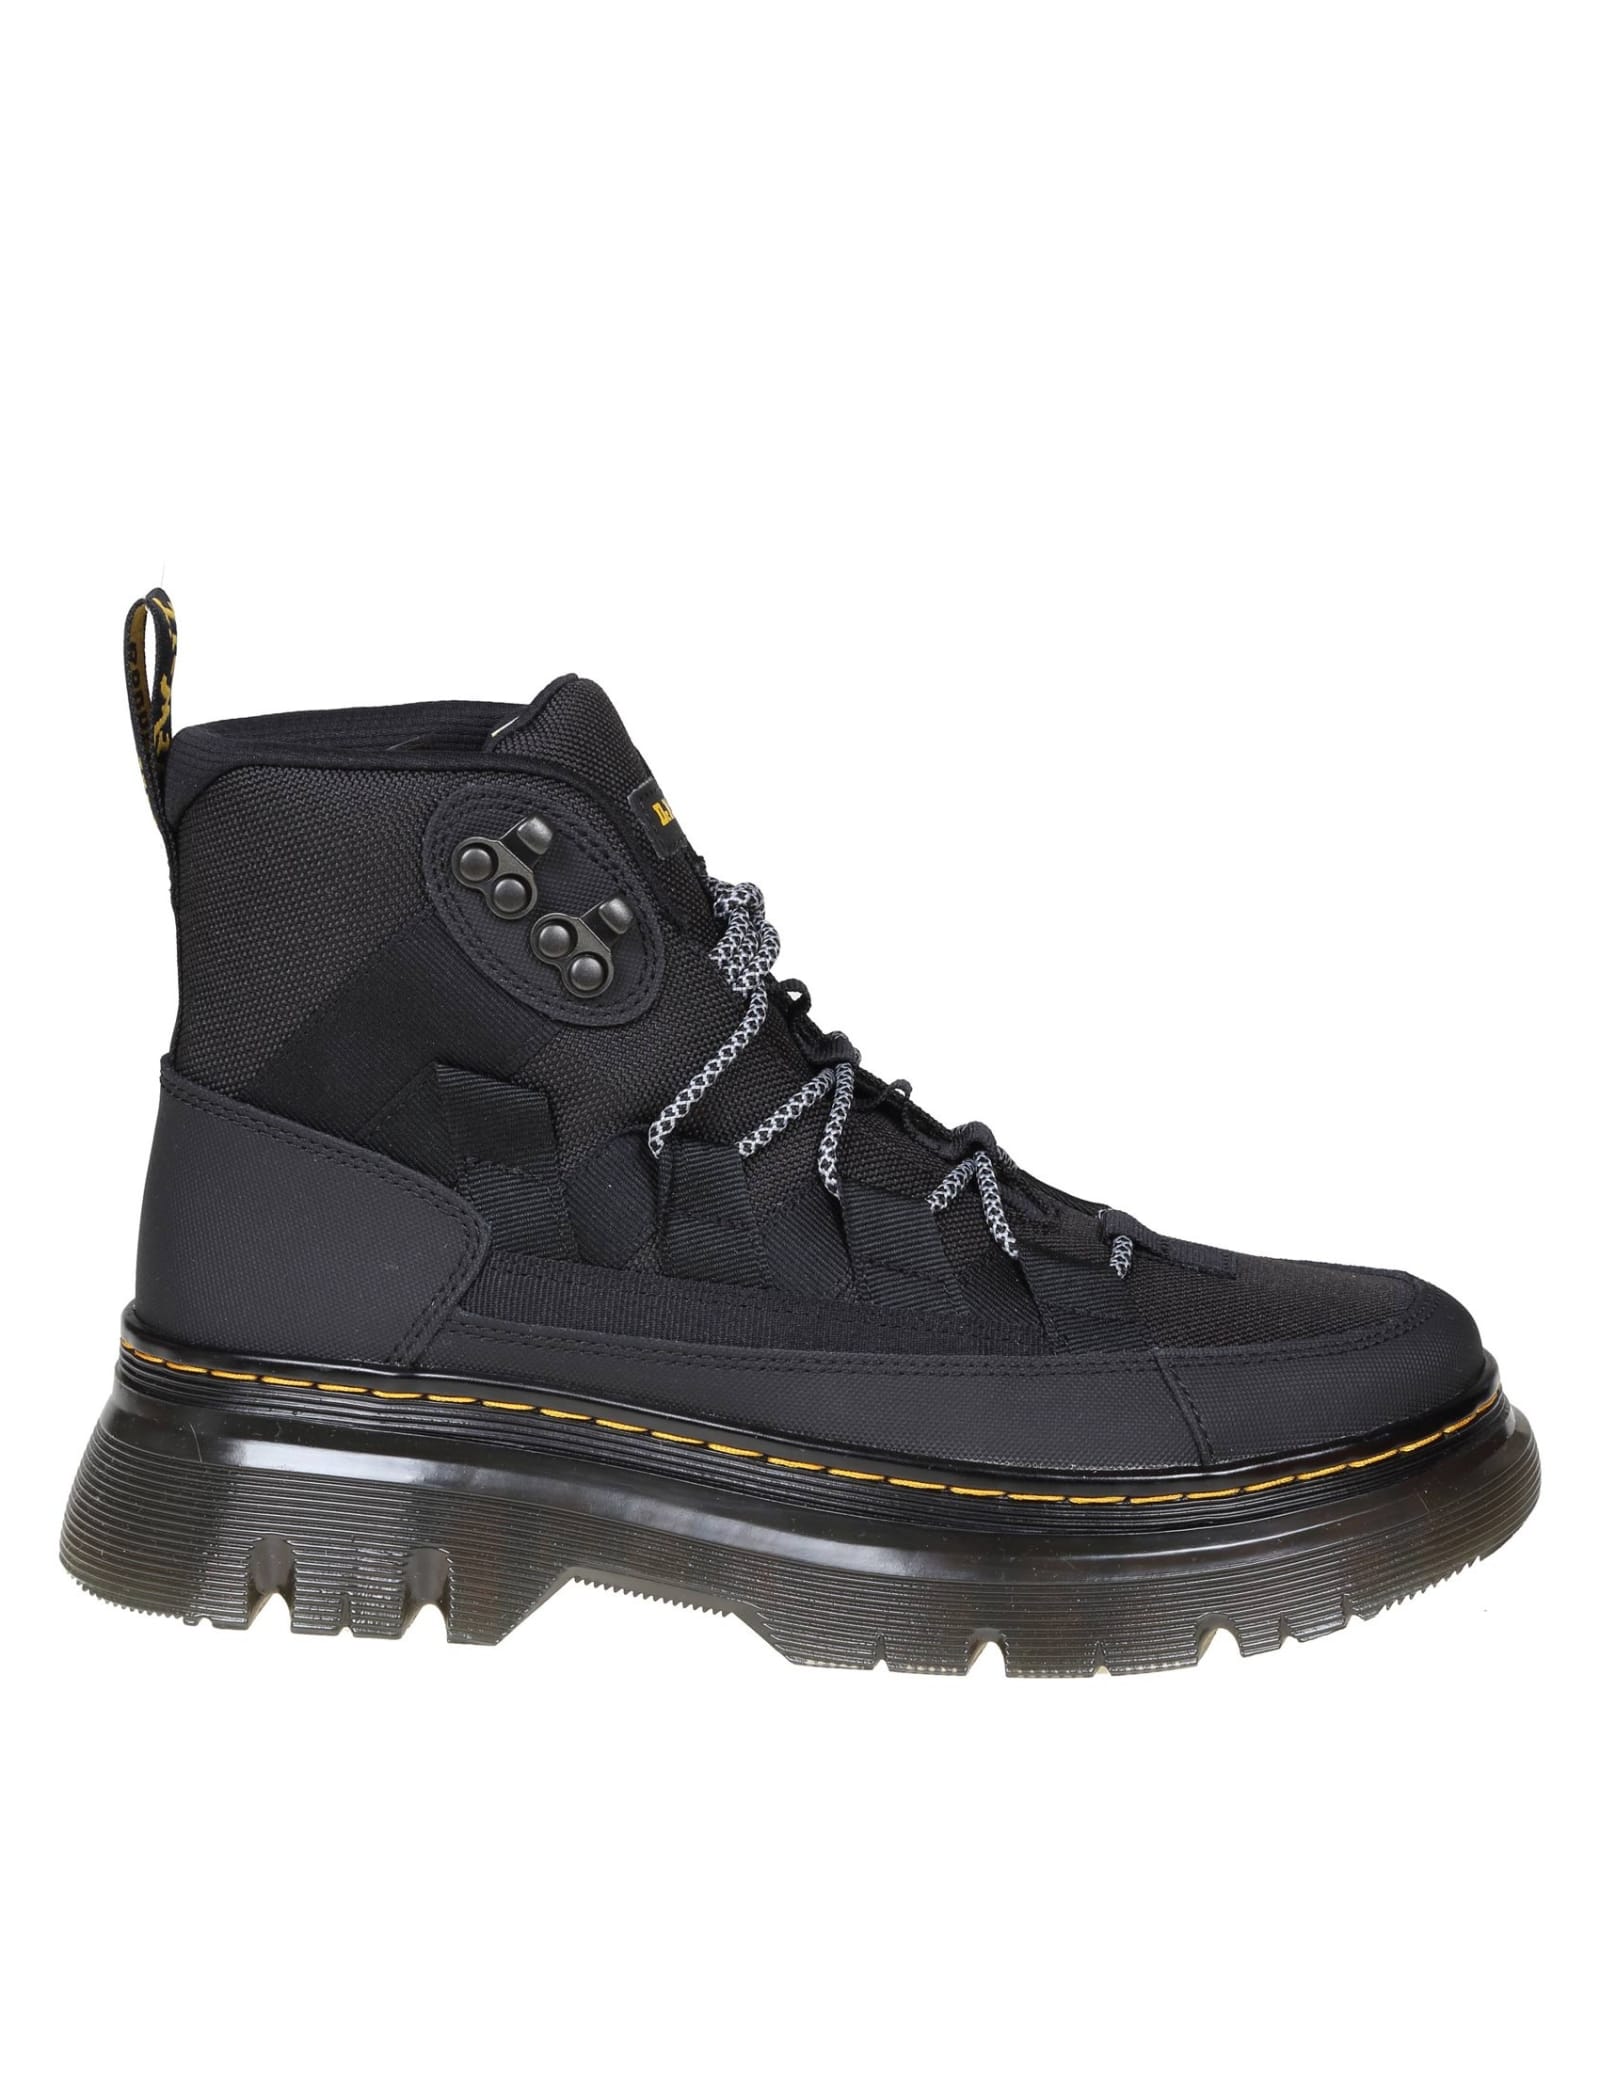 Dr. Martens Dr. martens Boury In Black Fabric